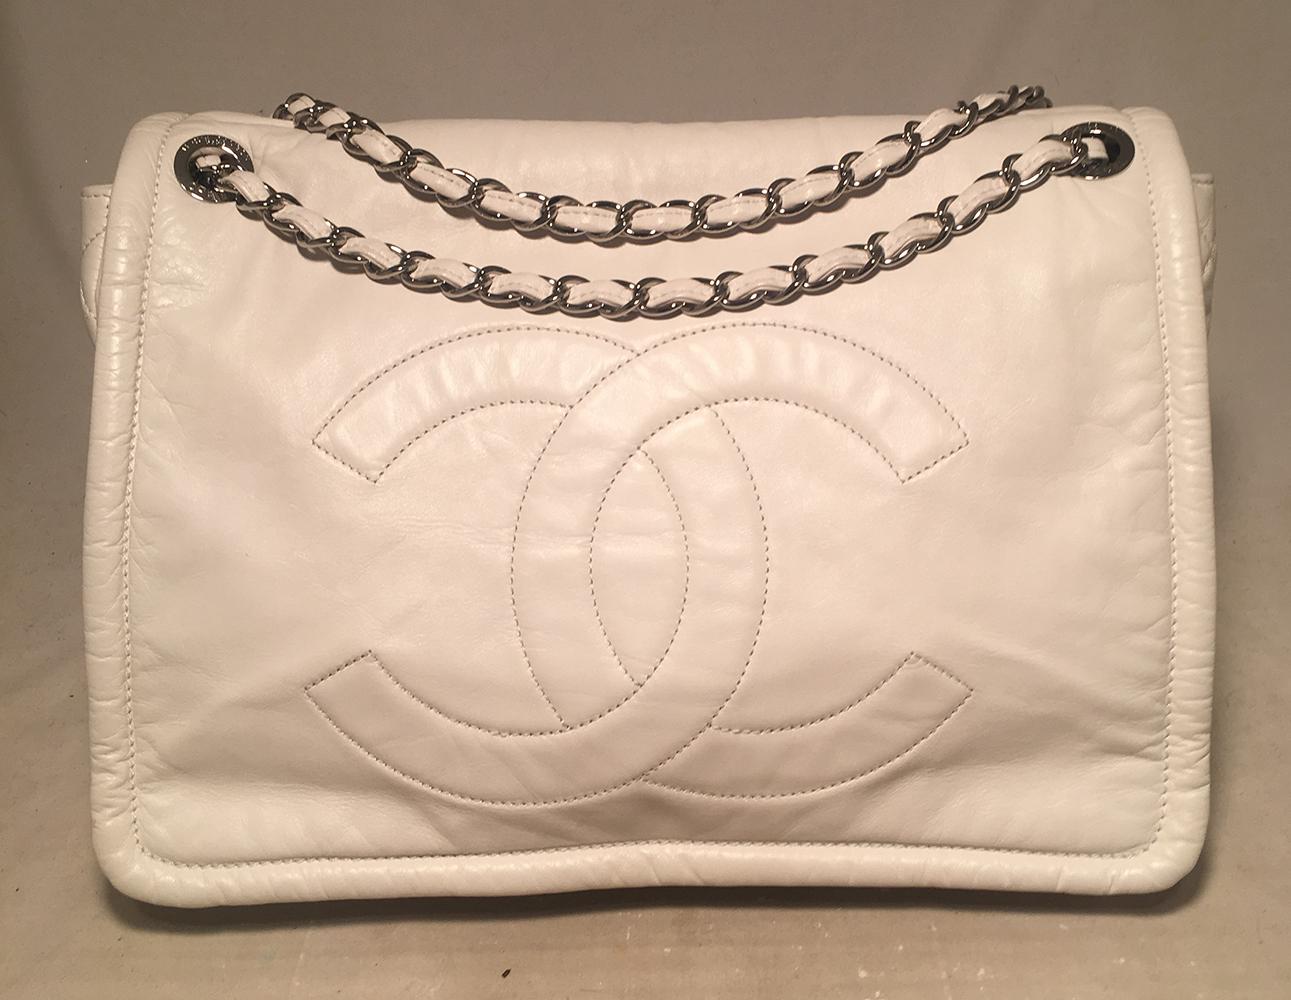 Chanel White Leather Quilted CC logo XL Maxi Classic Top Flap Shoulder Bag in excellent condition. White calfskin leather exterior with signature CC logo along top flap, quilted diamond pattern sides, and back side snap slit pocket. Front magnetic